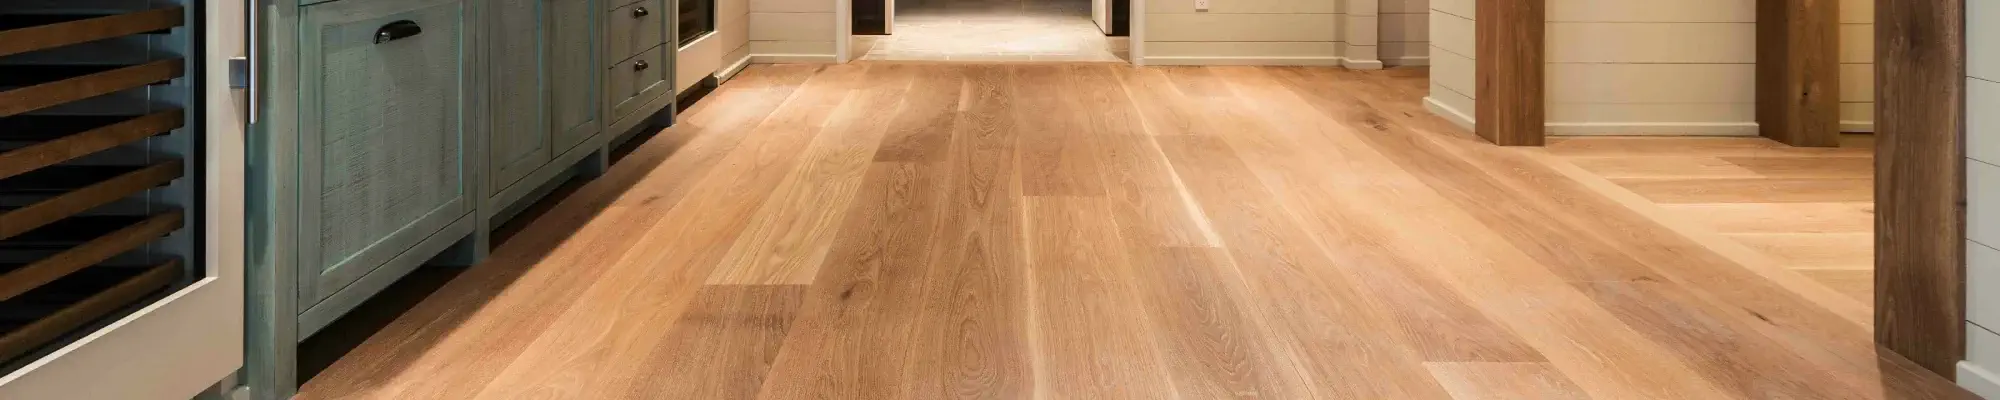 Hardwood gallery at Prestige Flooring Center | Cathedral City CA